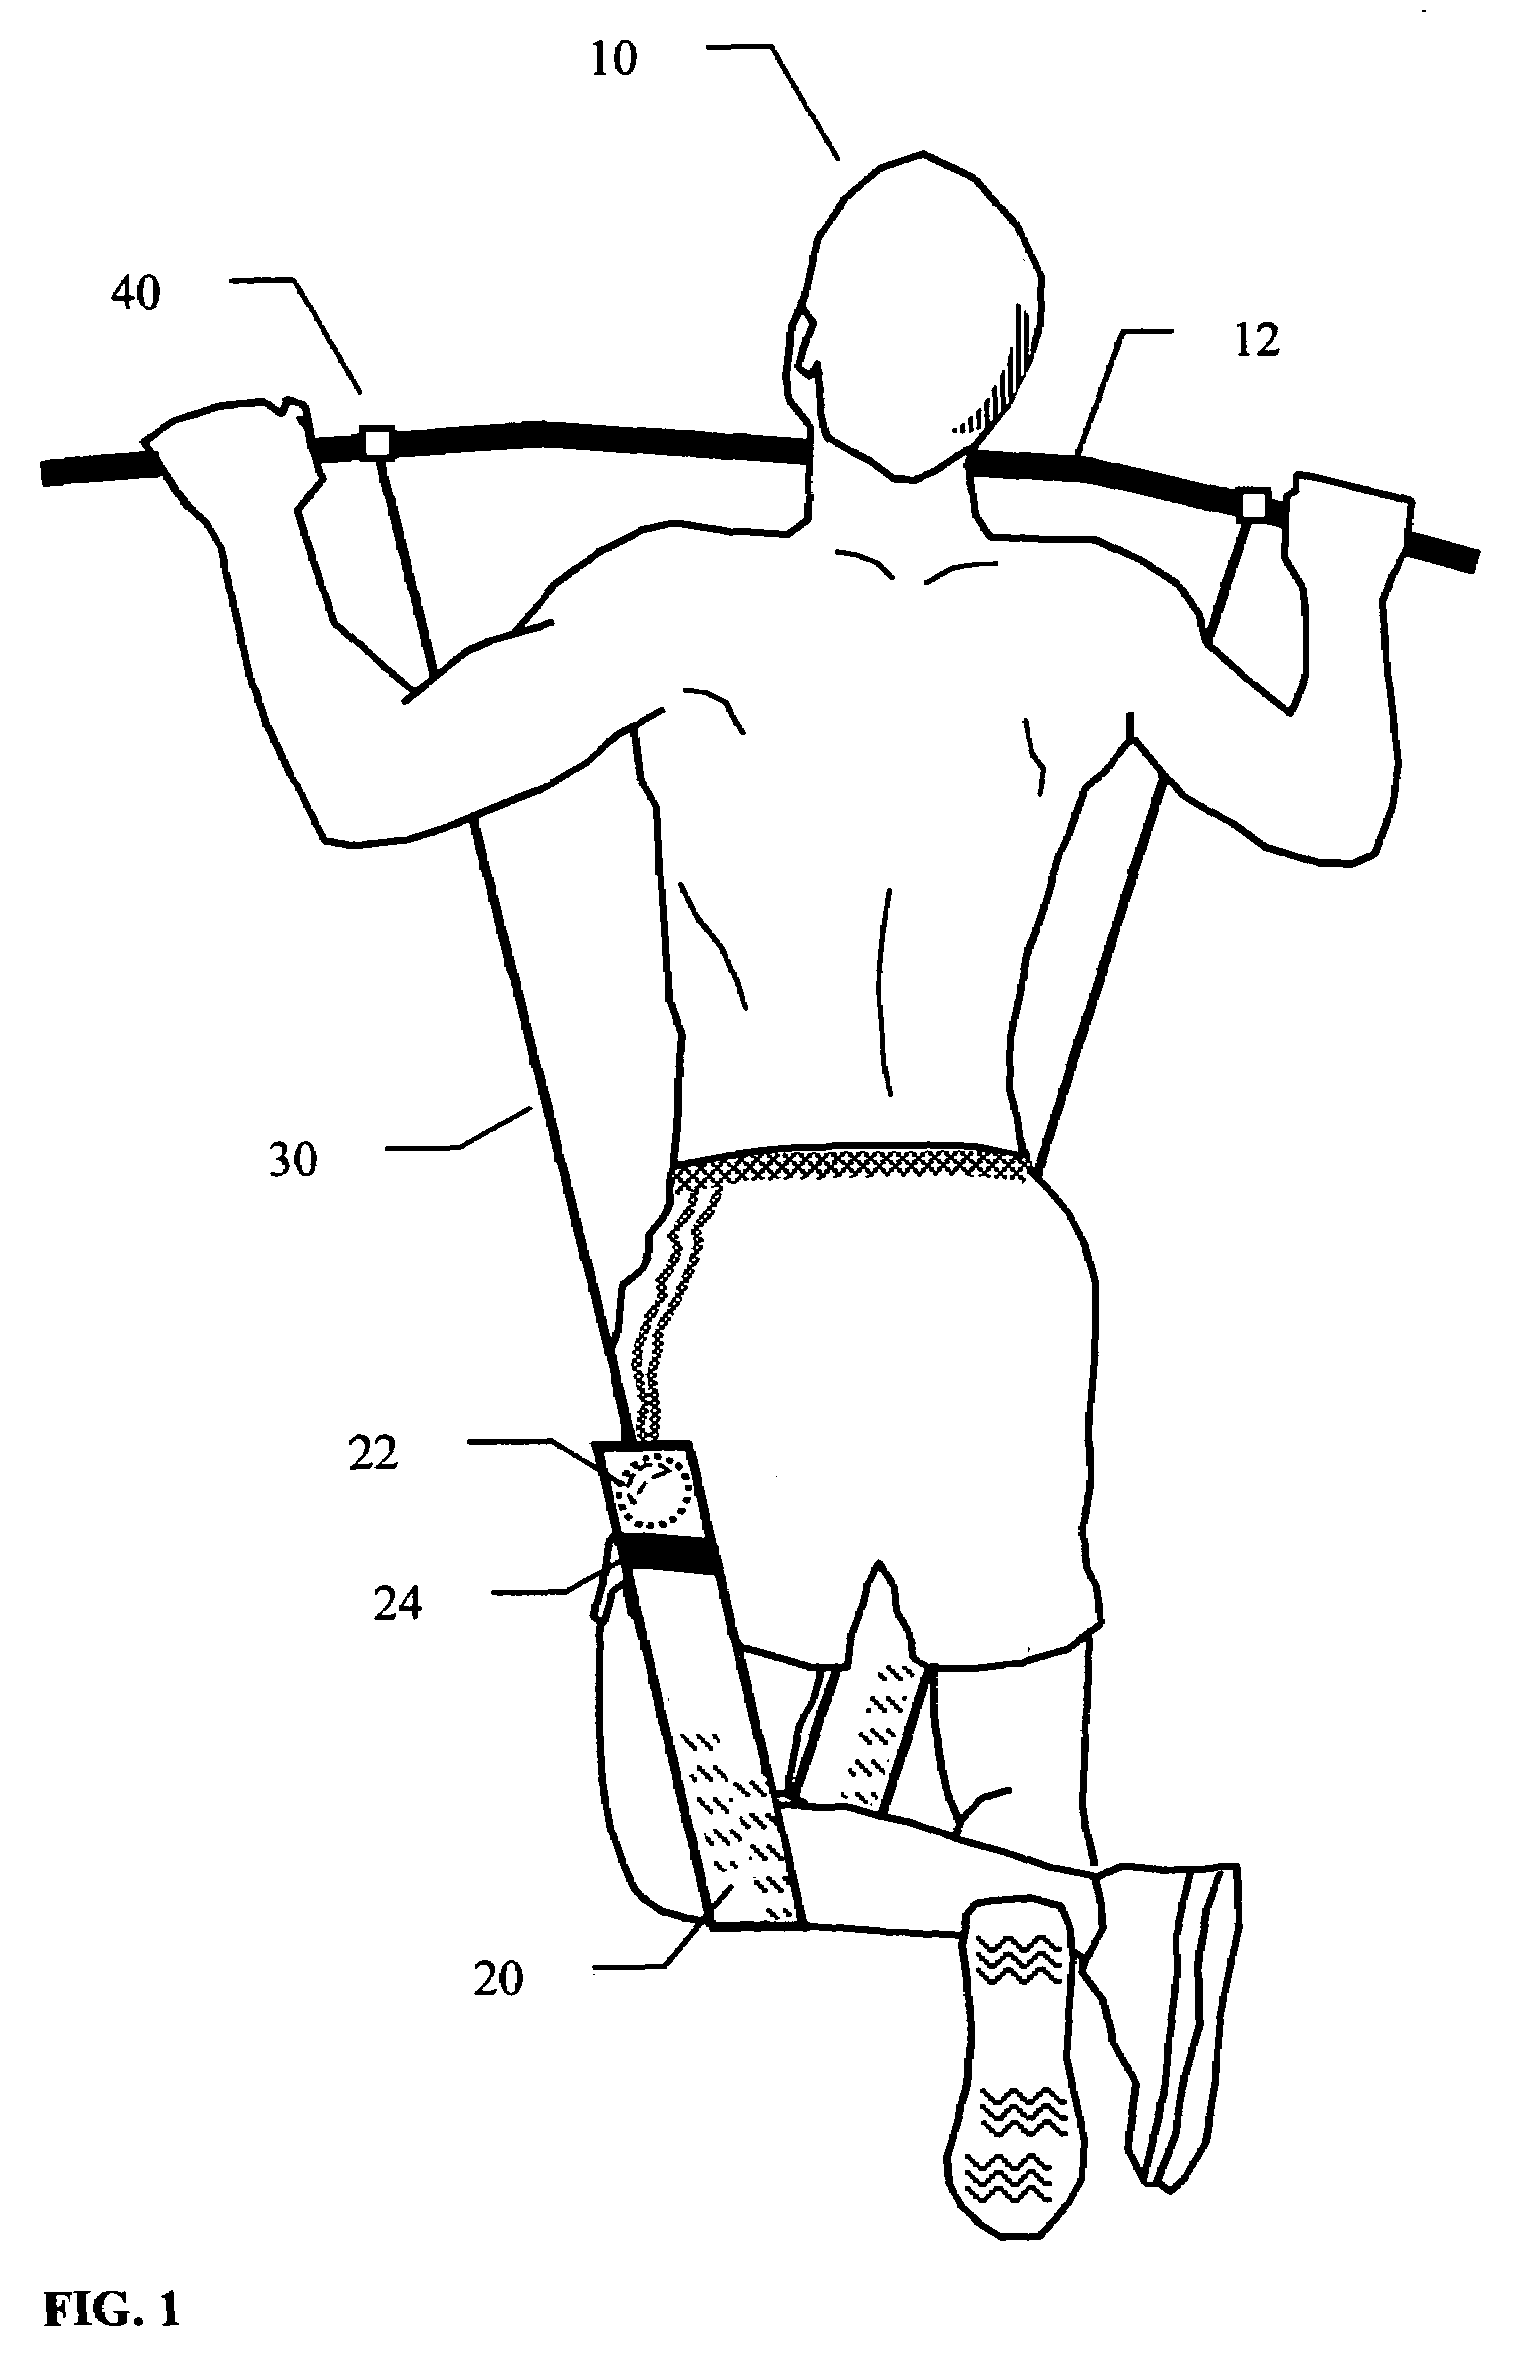 Portable device for assisting chin-up and dip exercises